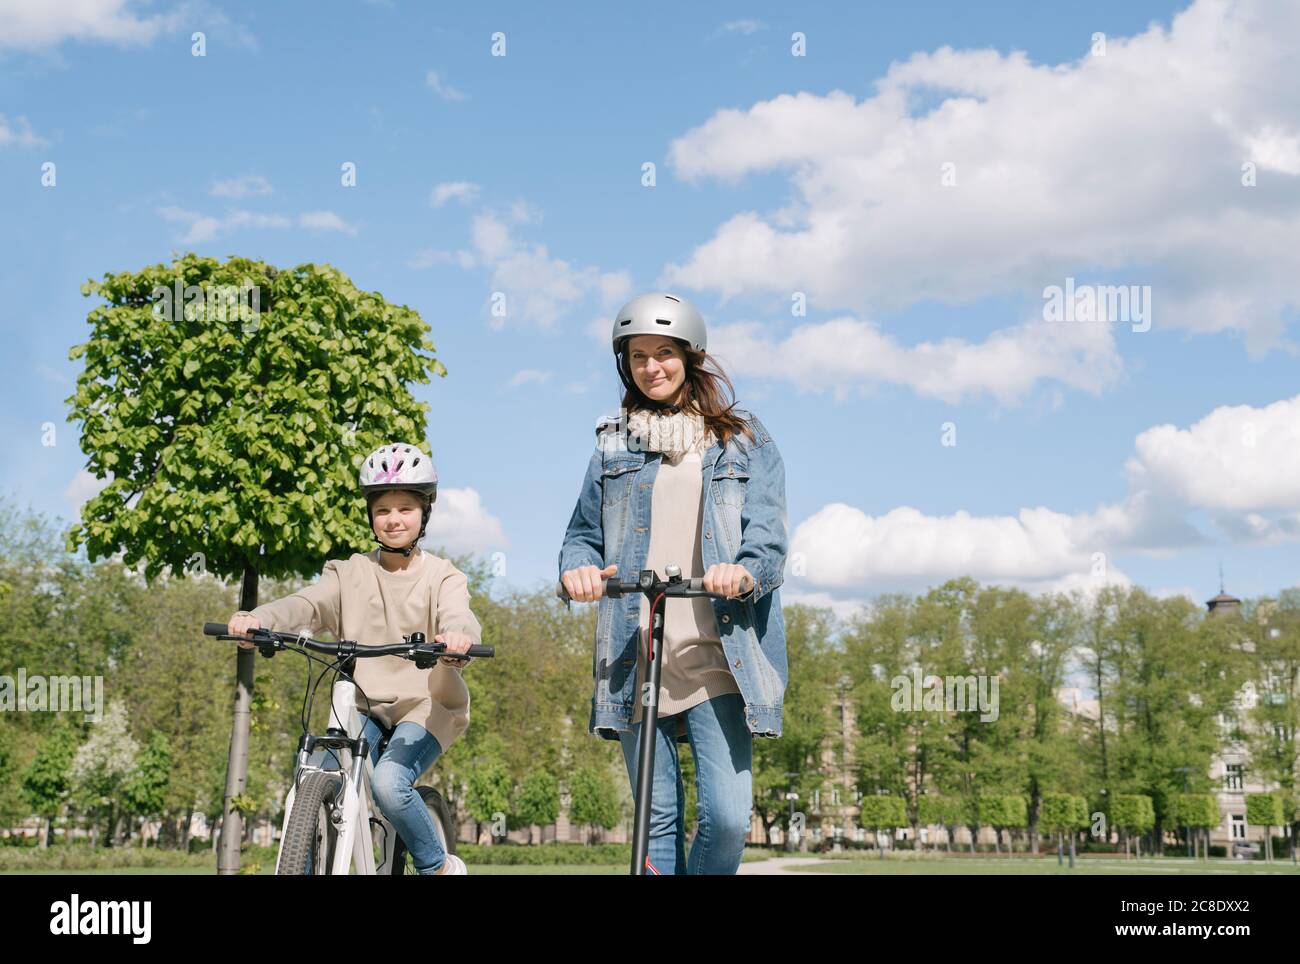 Girl cycling while mother riding motorcycle against sky in city park Stock Photo